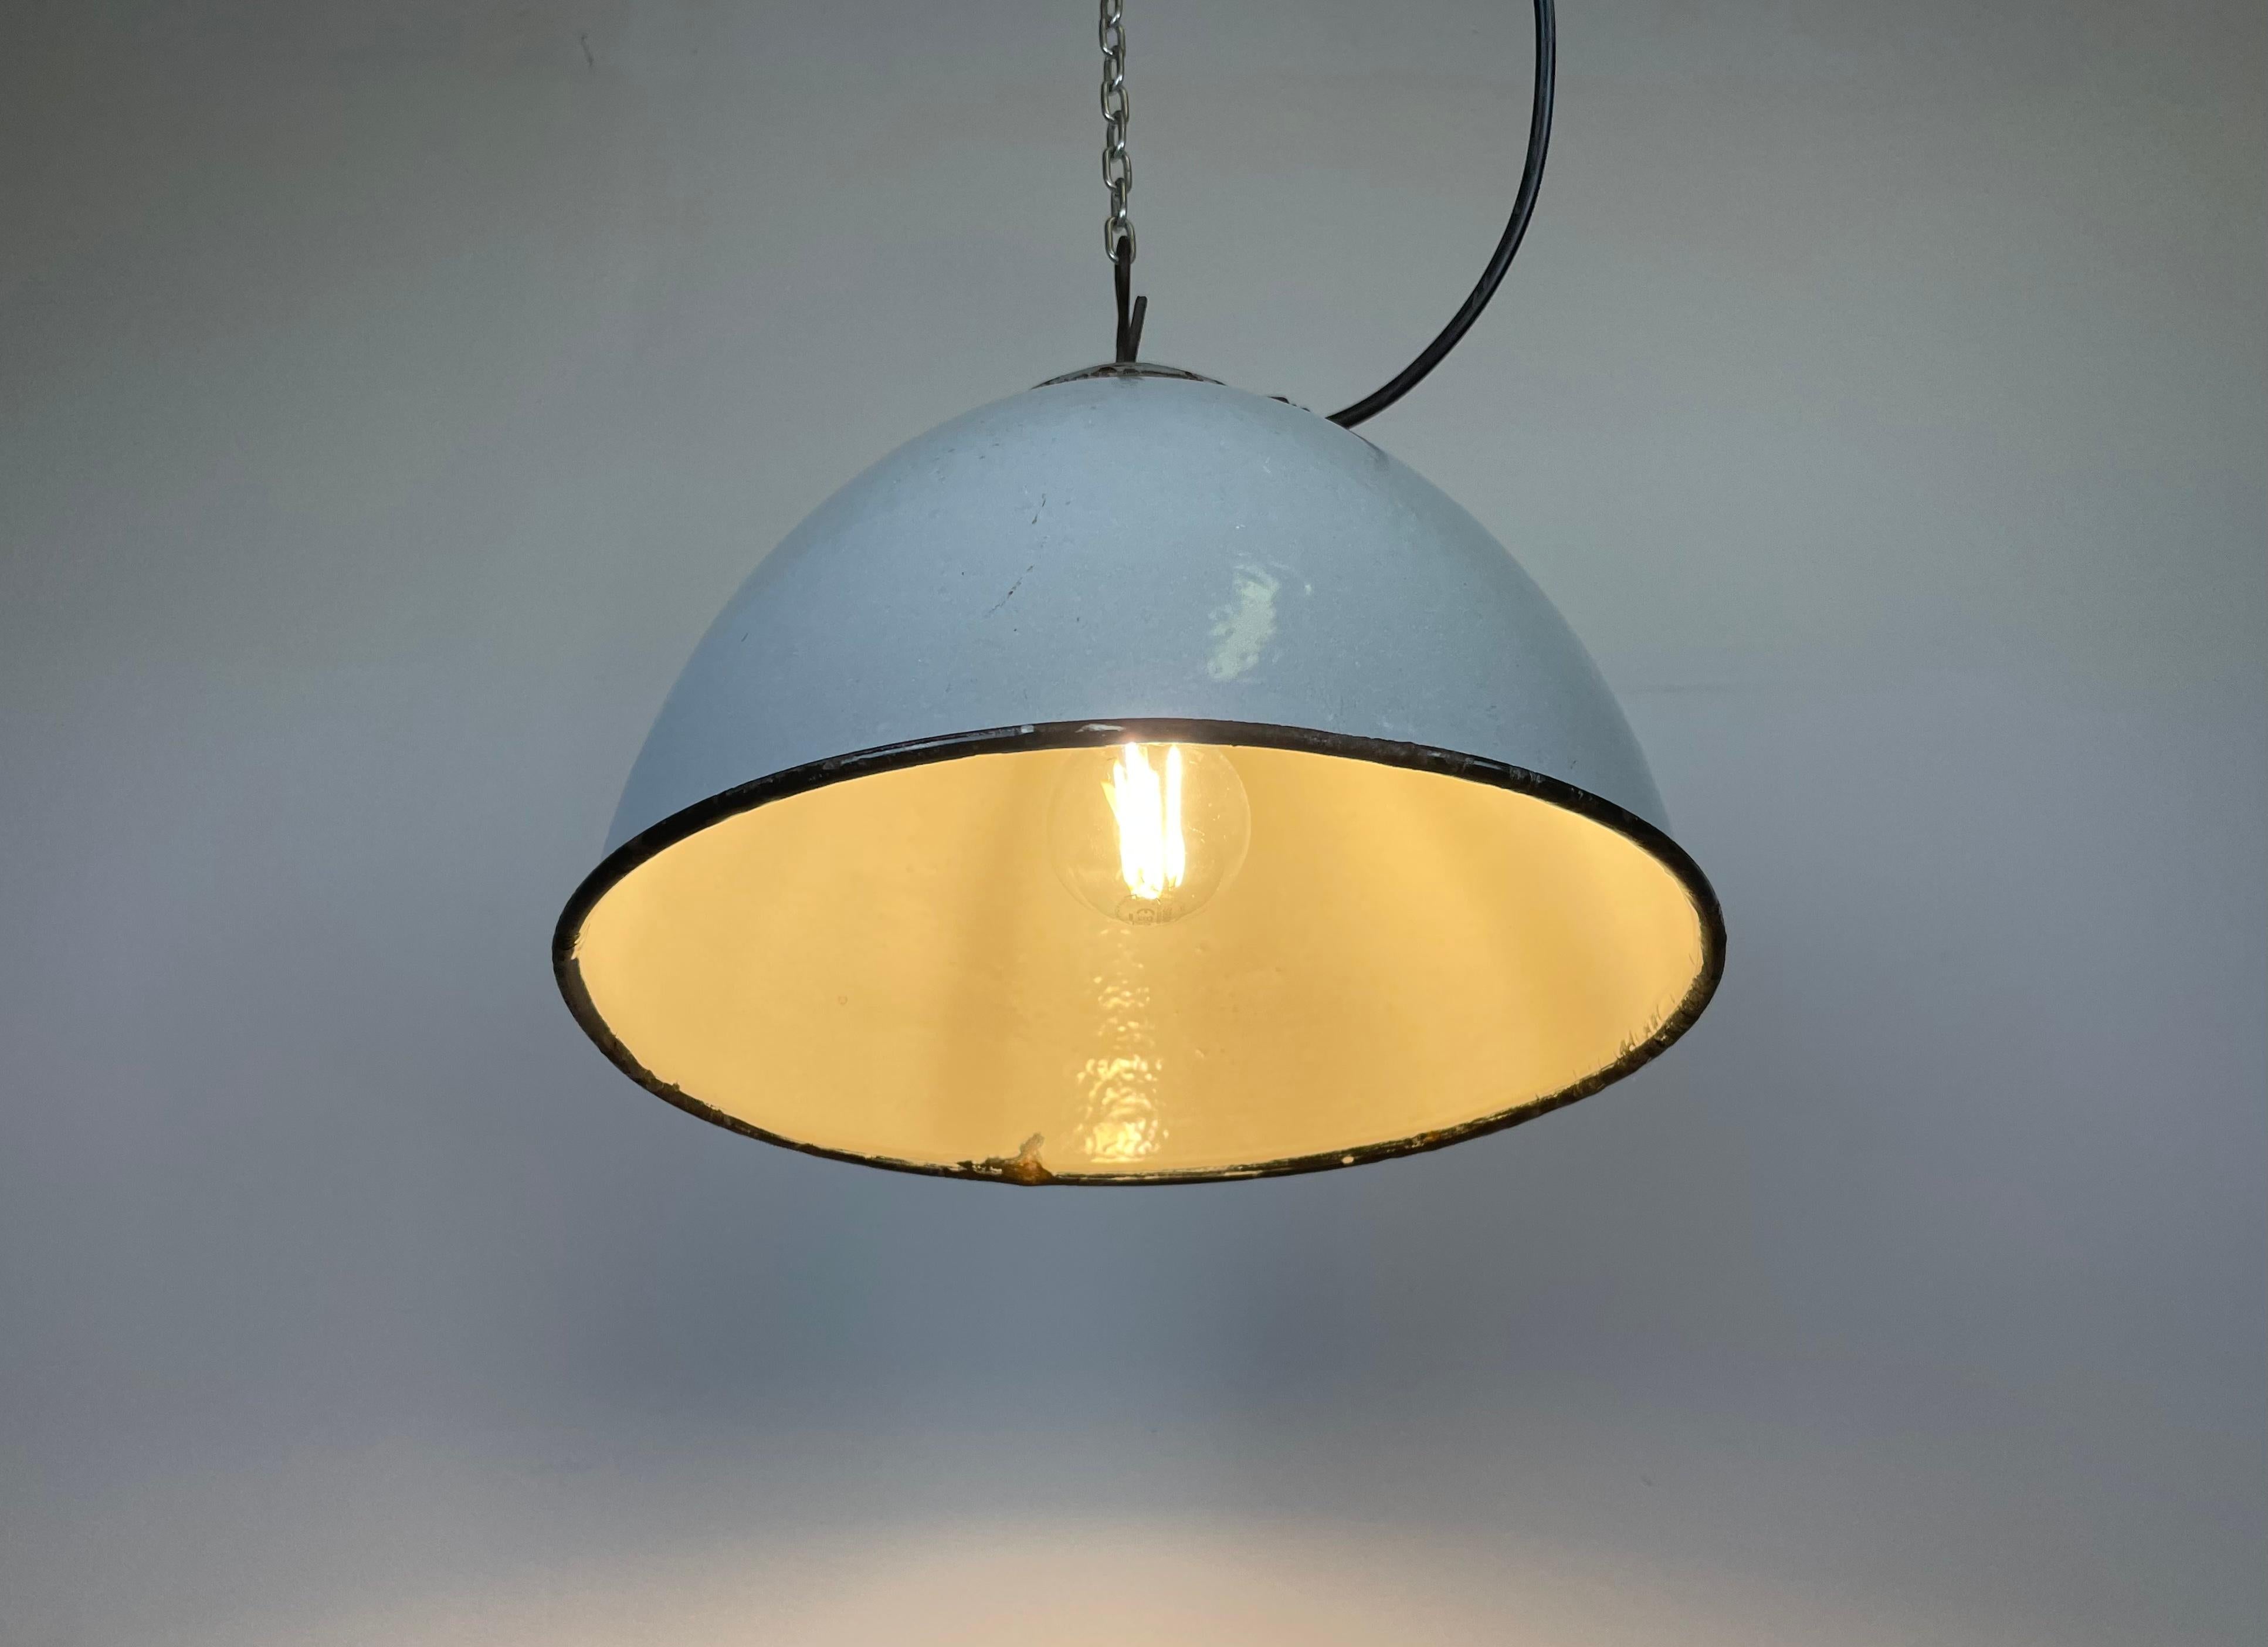 Industrial Grey Enamel Factory Lamp with Cast Iron Top from Zaos, 1960s For Sale 5